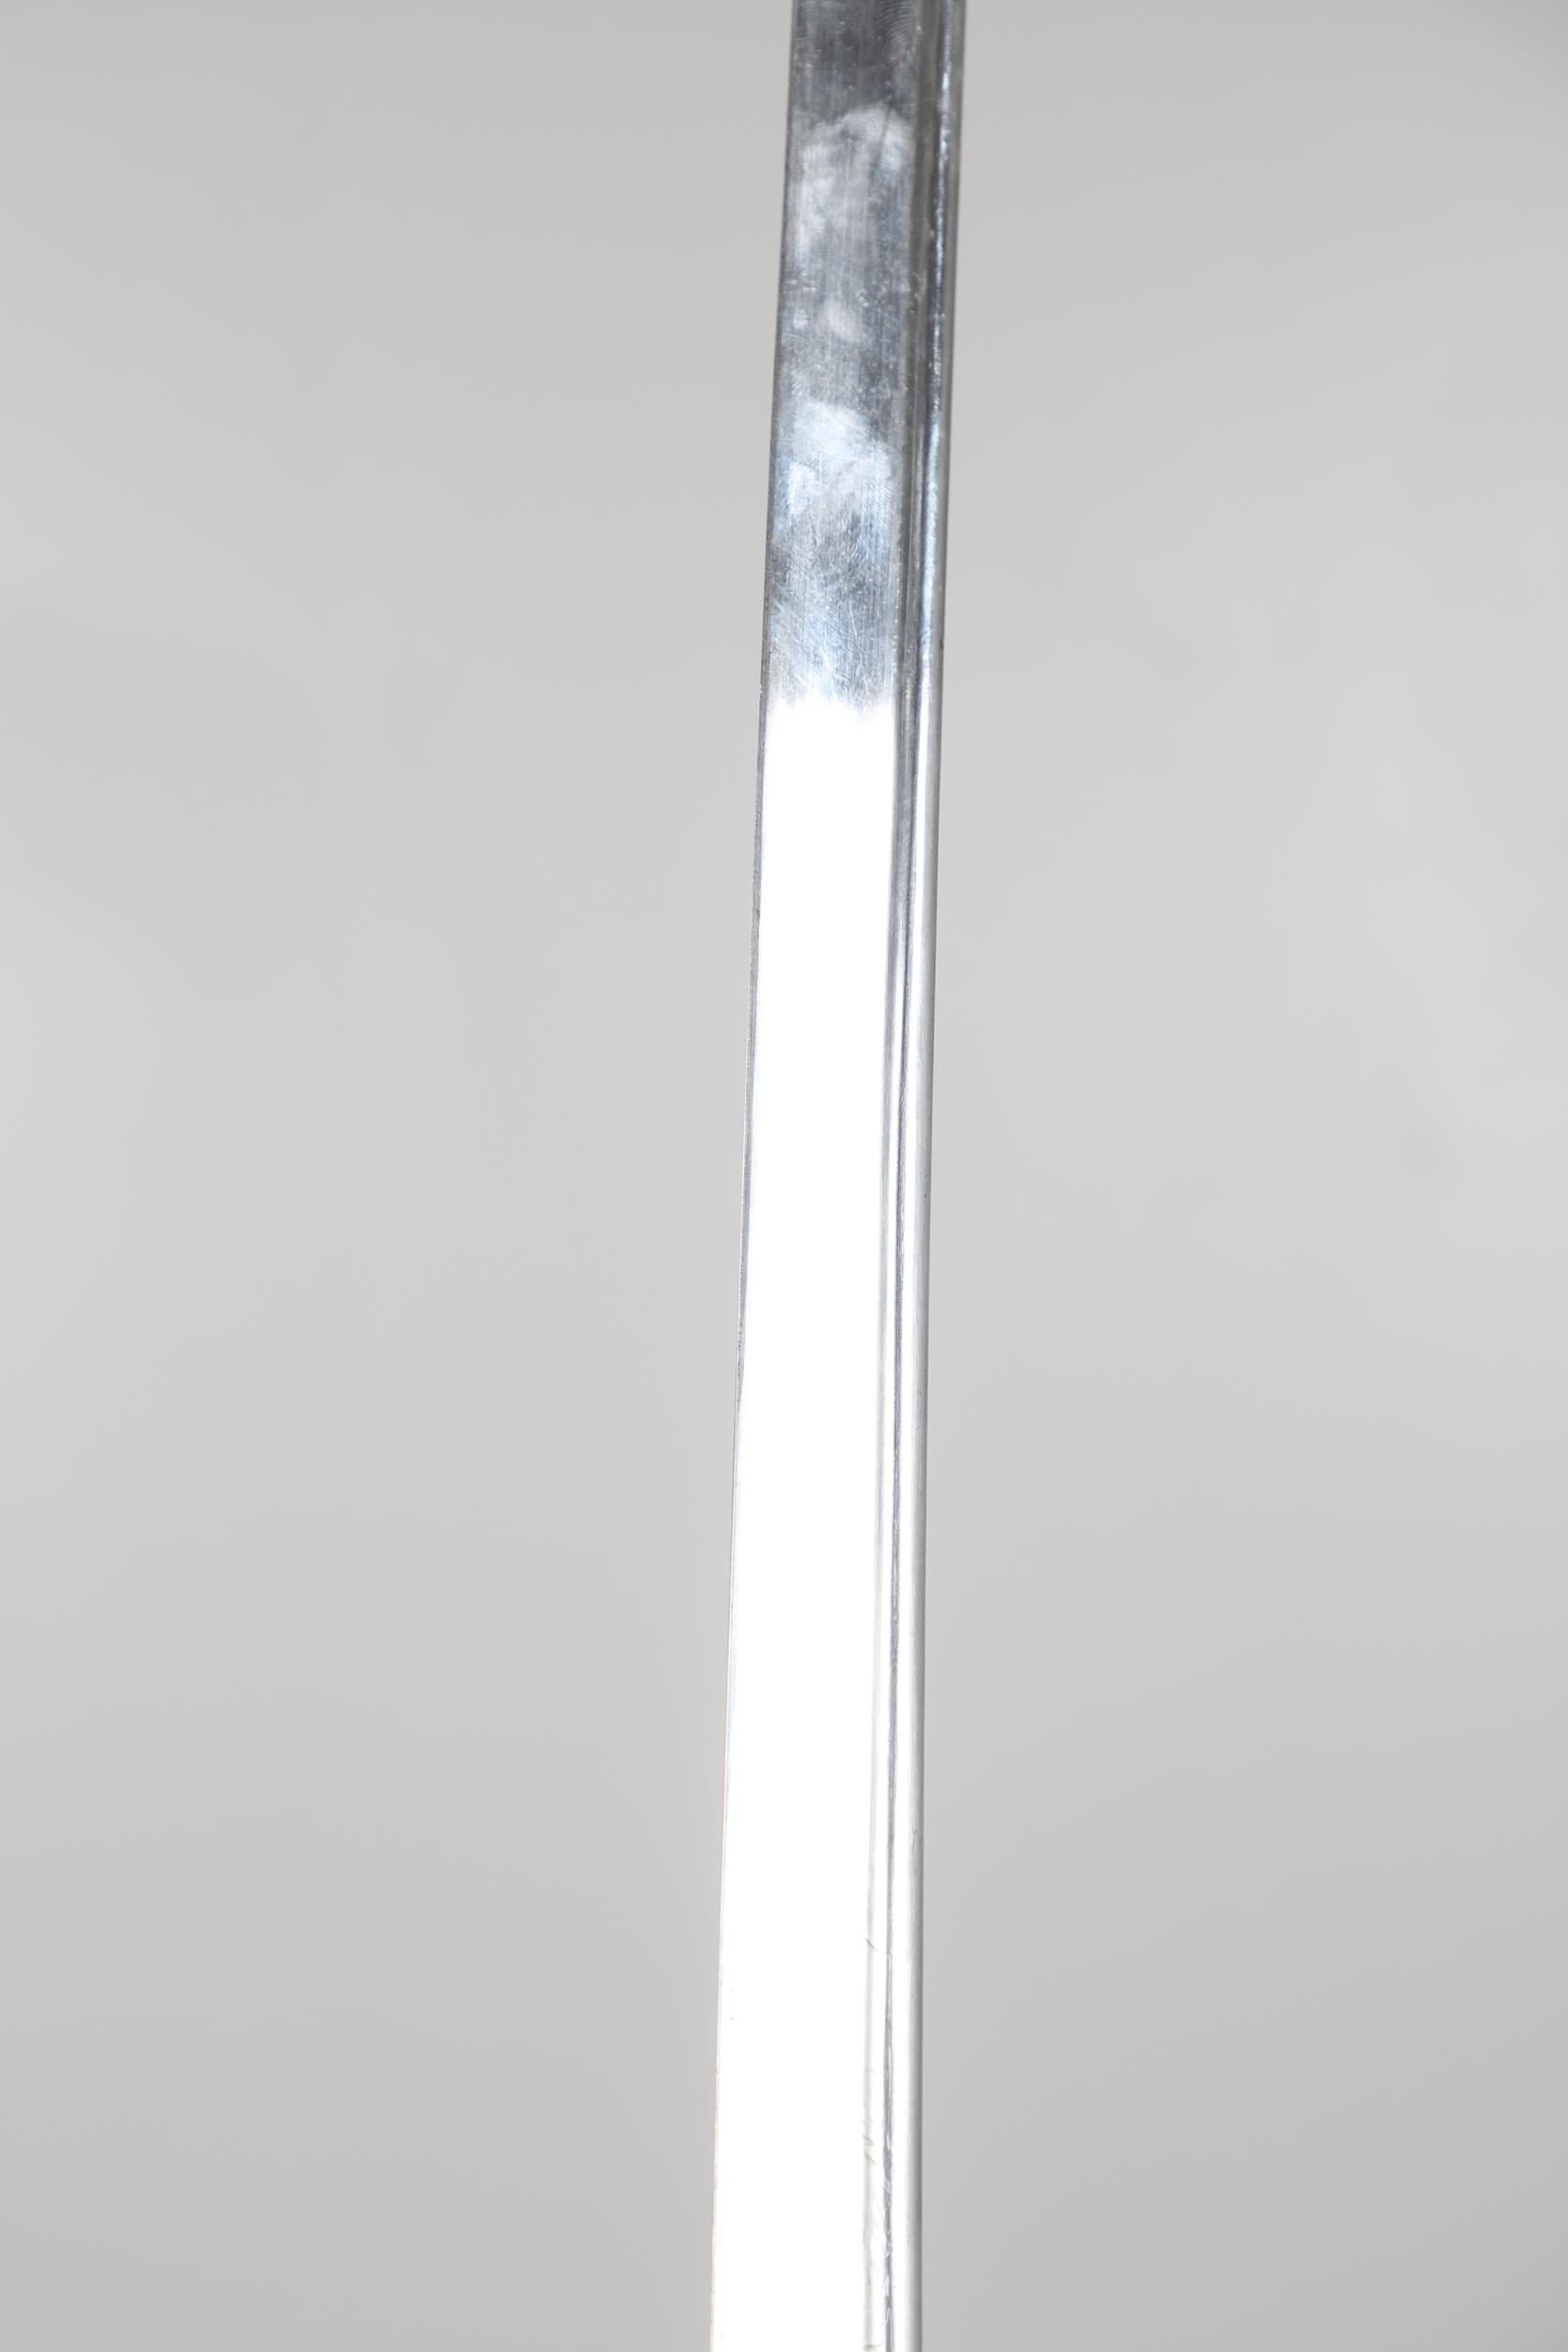 A GEORGE IV 1822 PATTERN HEAVY CAVALRY PATTERN SWORD BY ANDREWS OF PALL MALL. - Image 11 of 12